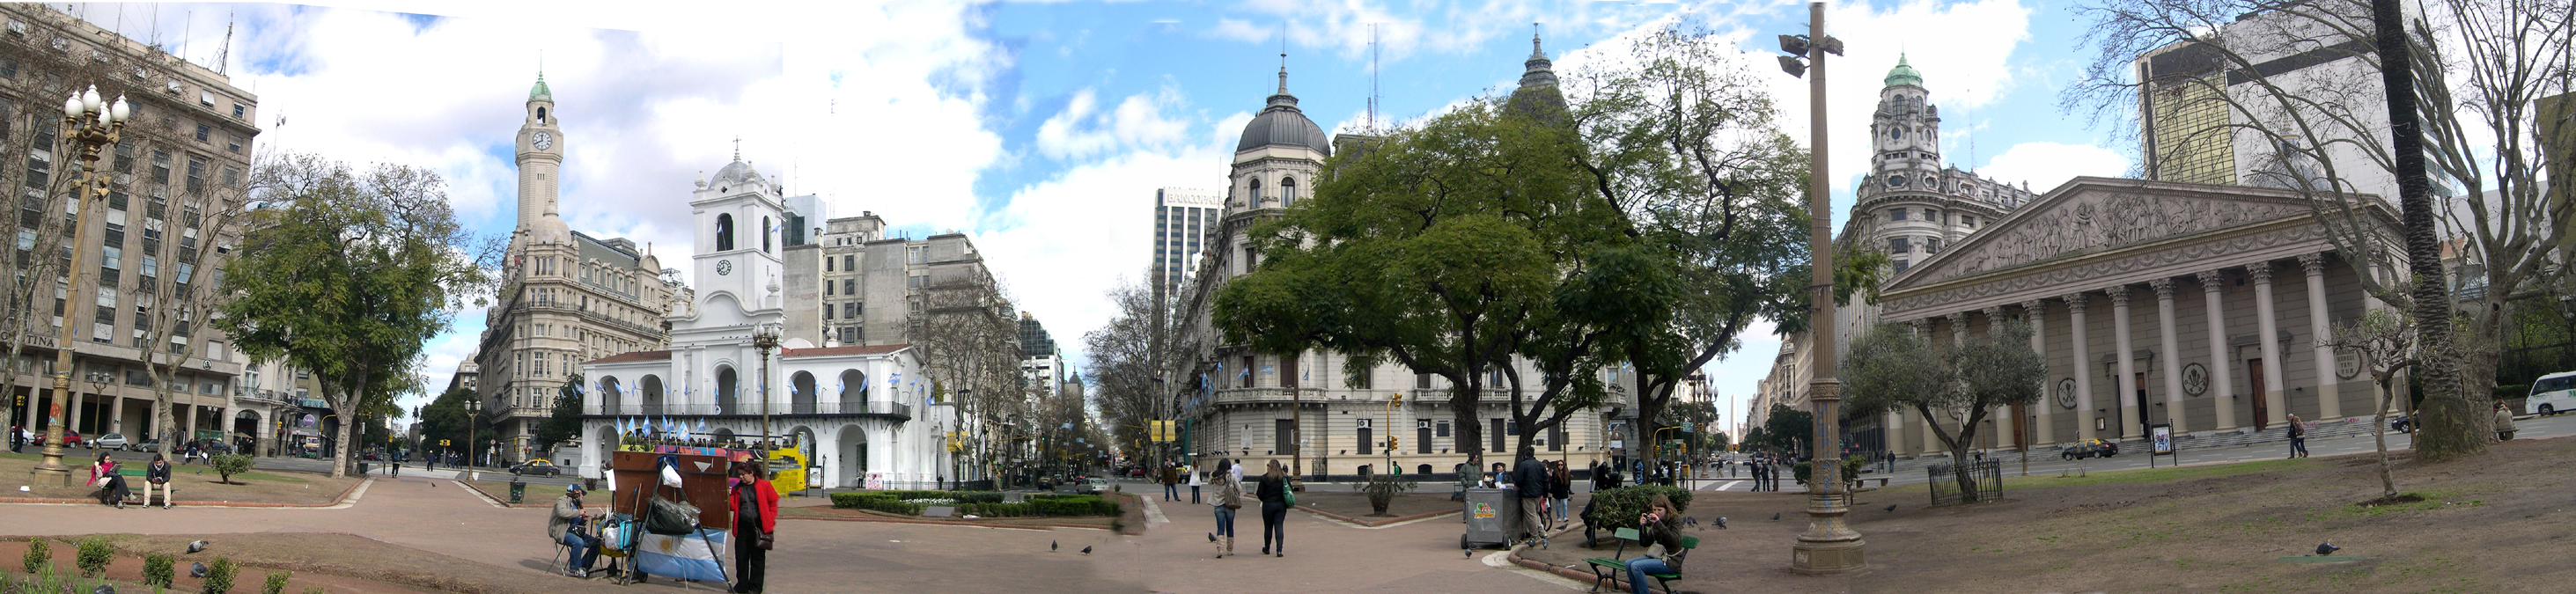 Buenos Aires - panoramic view from the Plaza de Mayo